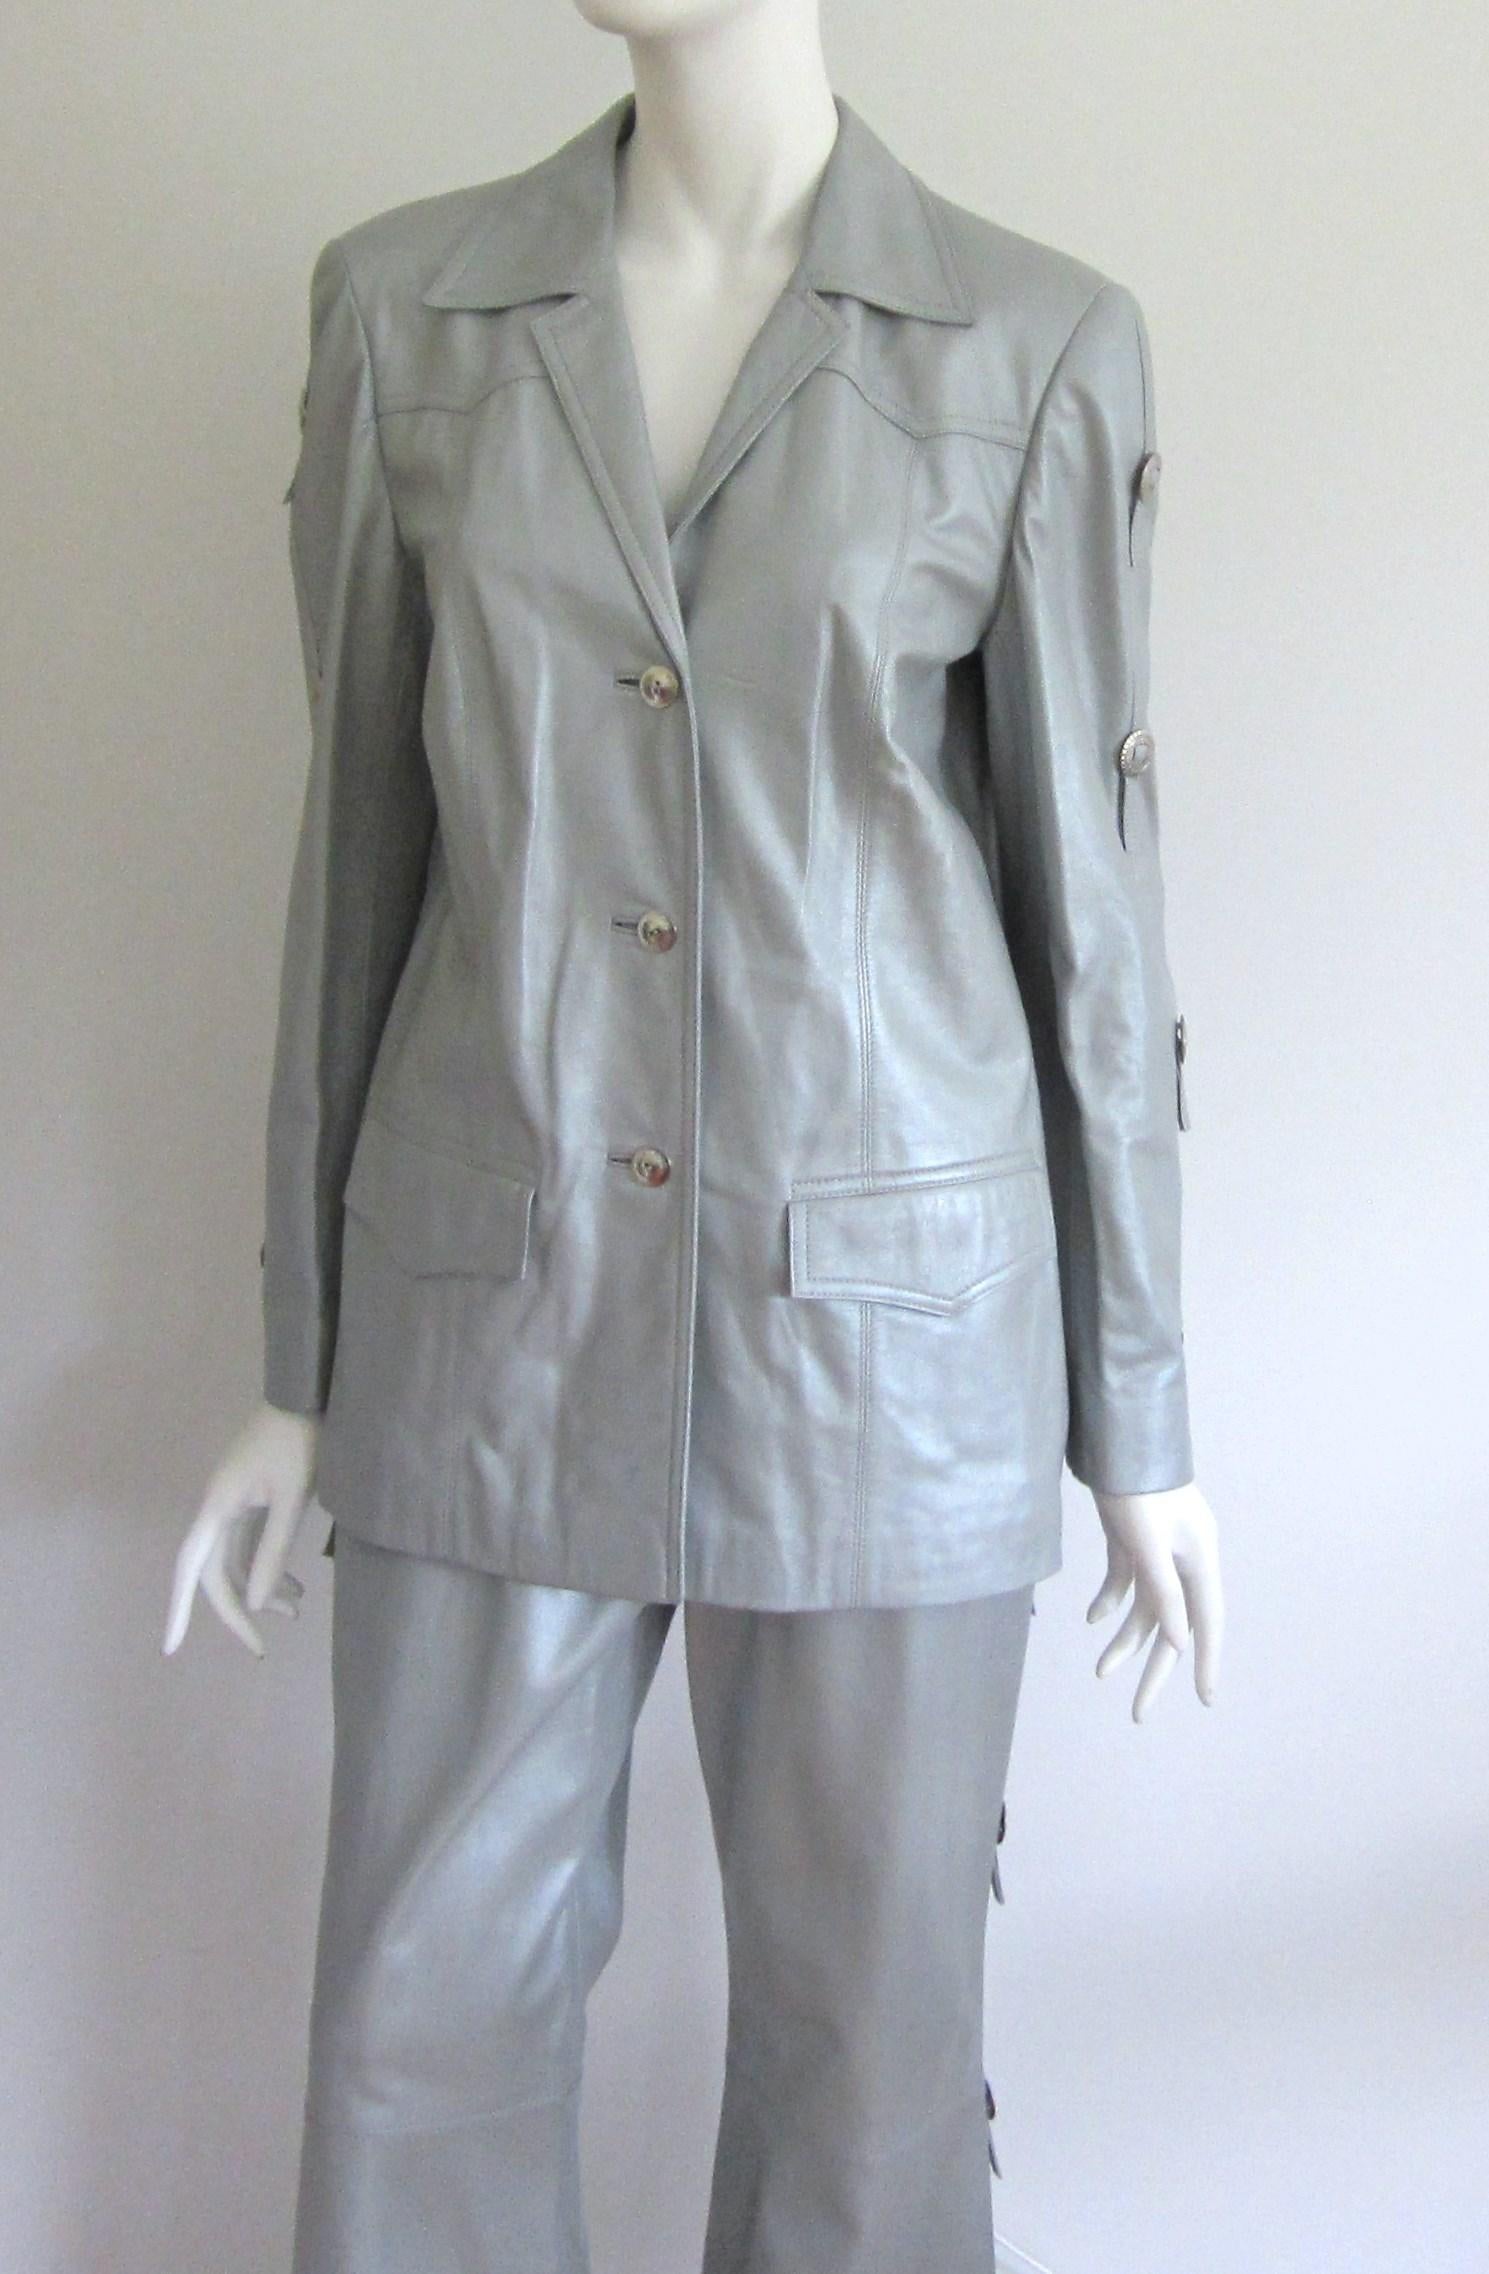 Escada Leather Western Motif Grey Suit Jacket Wide Bell Bottom Pants New With Tags 1990s. WIll fit an 8-10. Please refer to measurements. Both the jacket  and pants are marked a size 38 - Measuring up to 38 inch bust. -- up to 36 inch waist -- 29.25